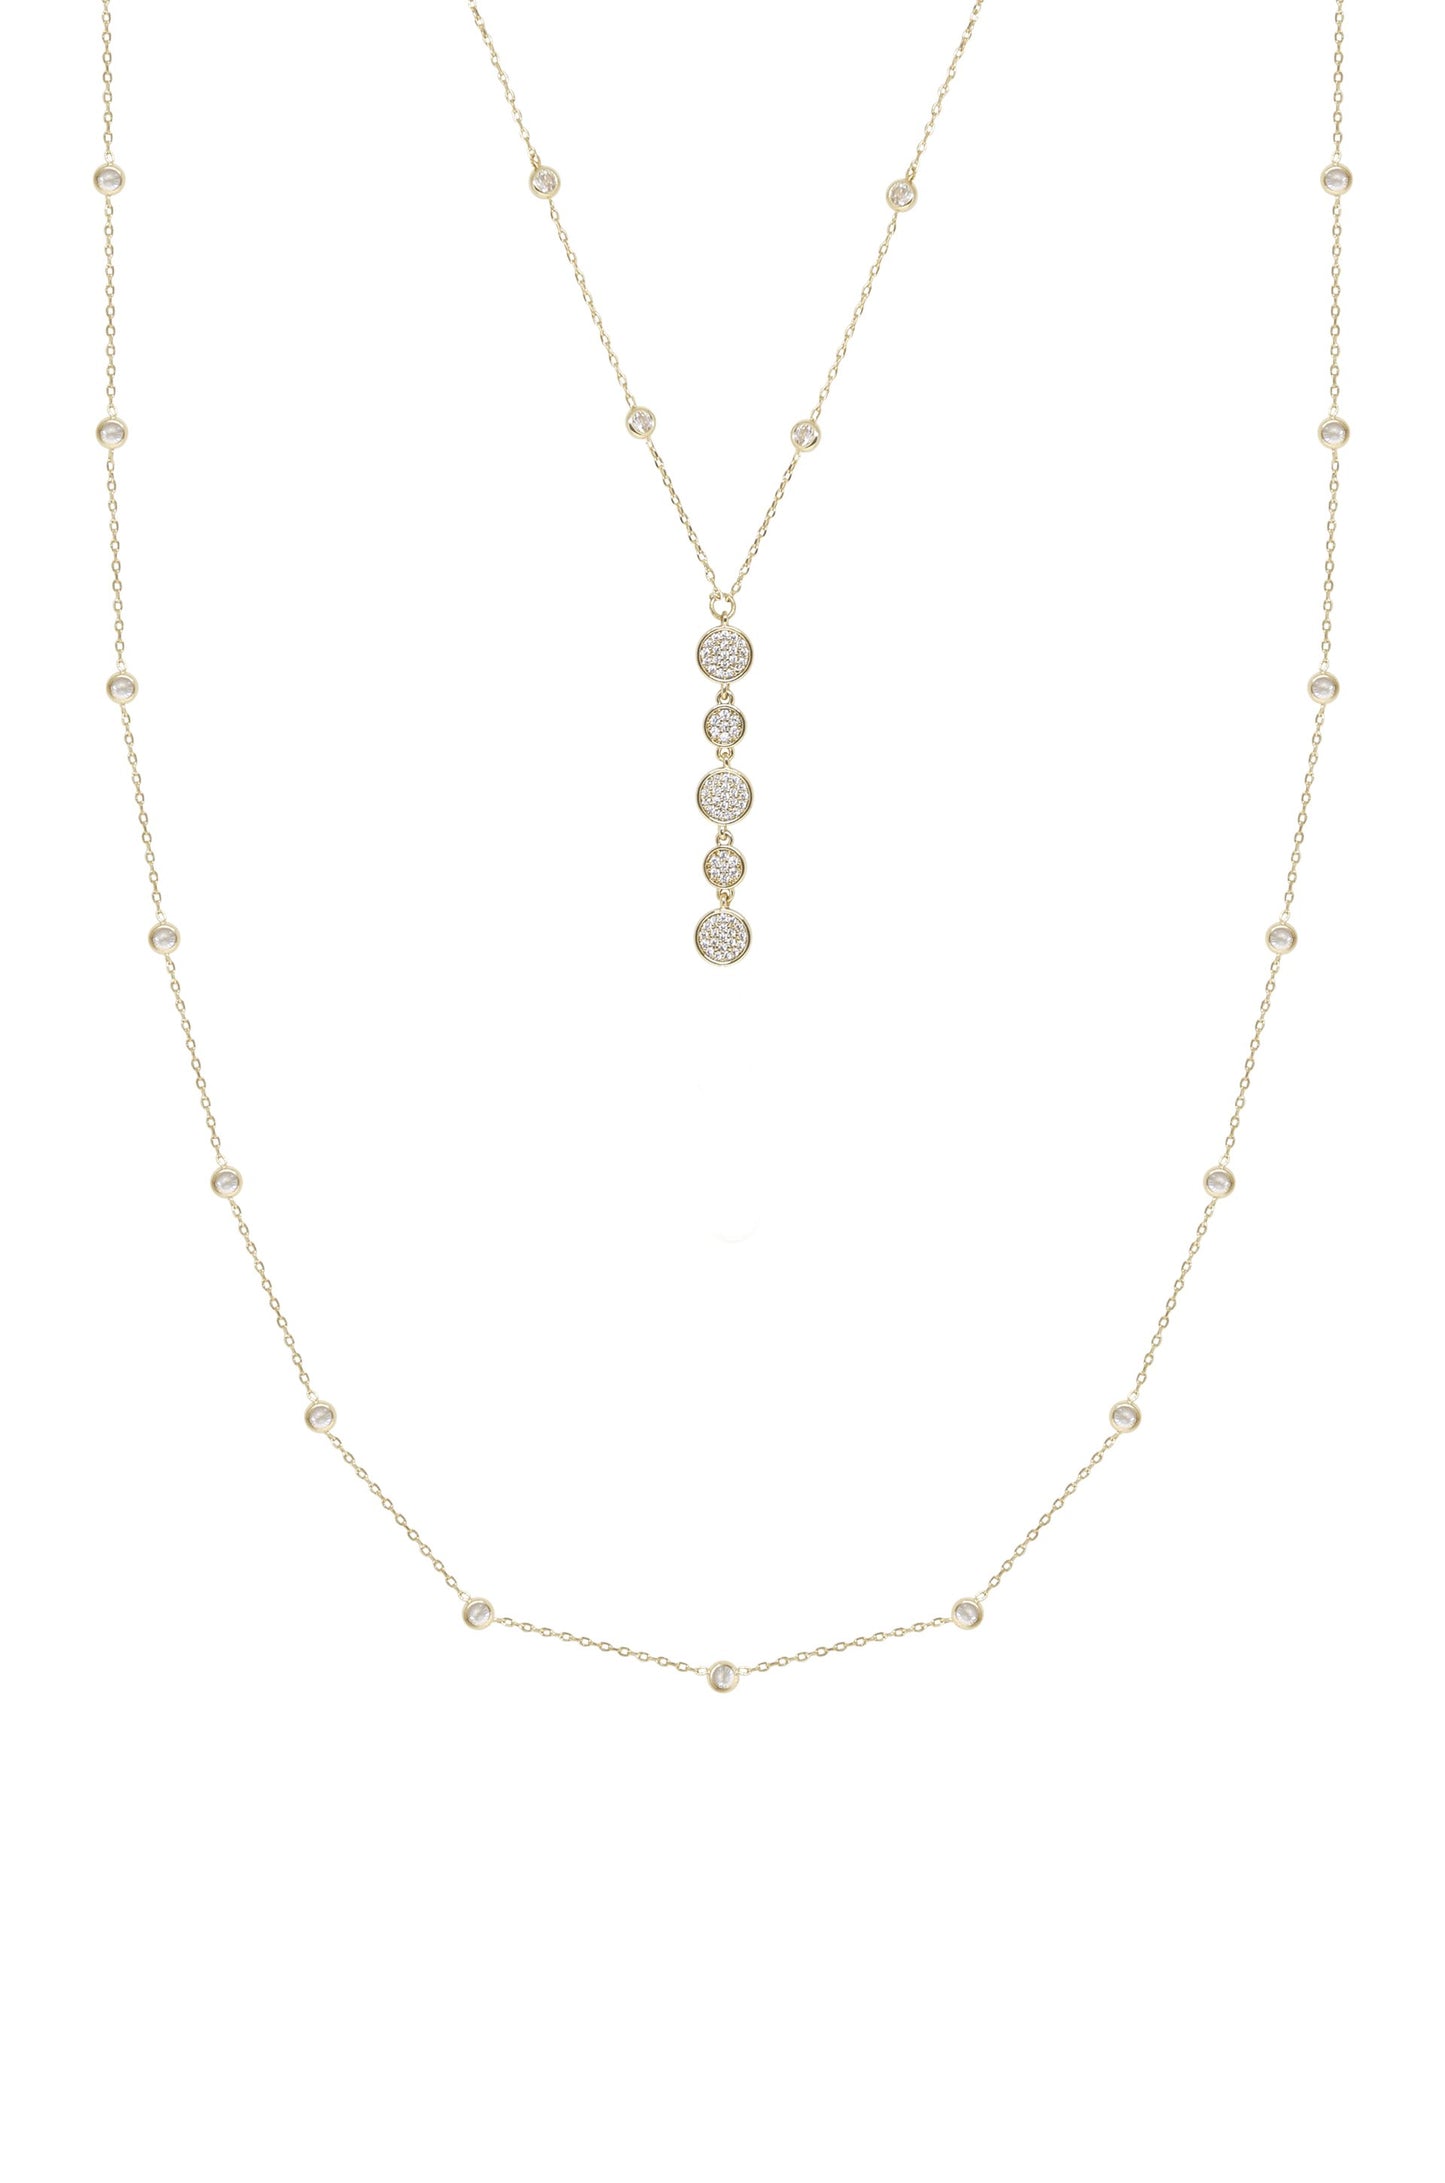 Black Tie Layered Crystal and 18k Gold Plated Necklace Set on white background  